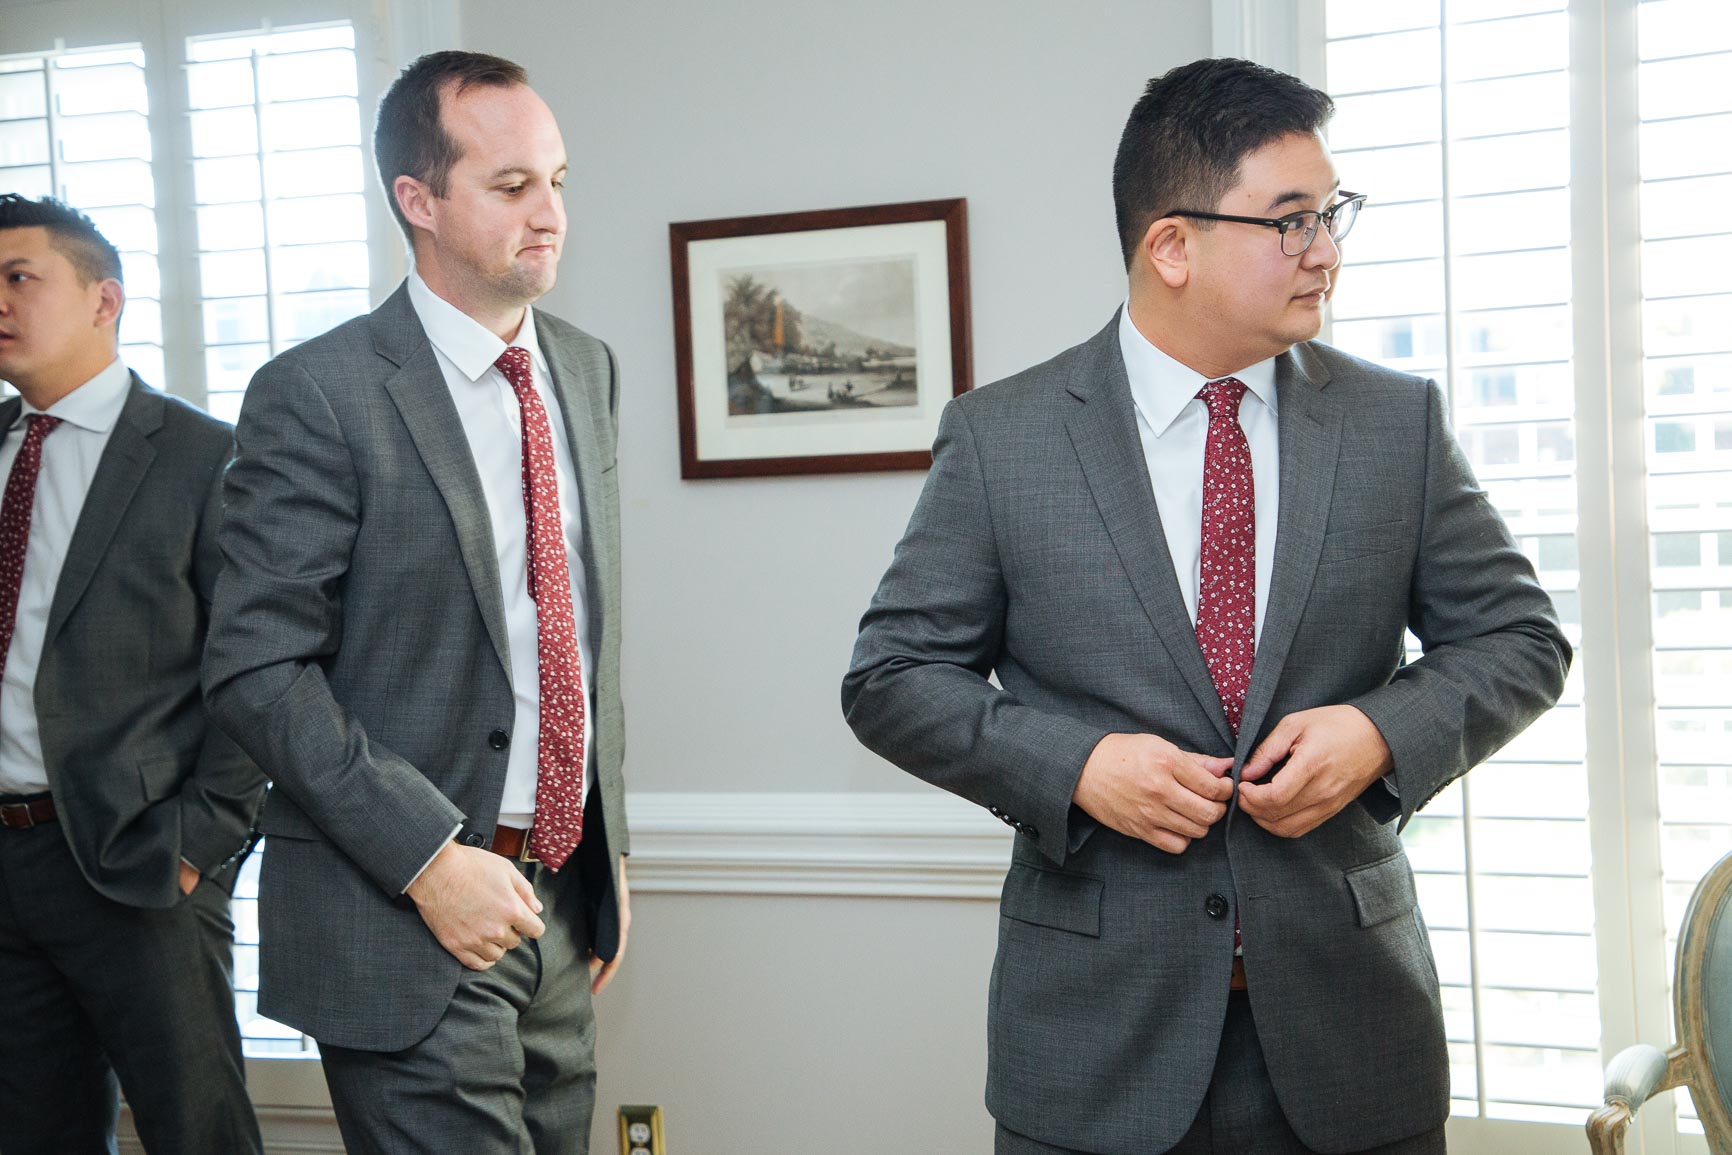 Wedding getting ready in Charlotte, NC ready by Nhieu Tang photography | nhieutang.com